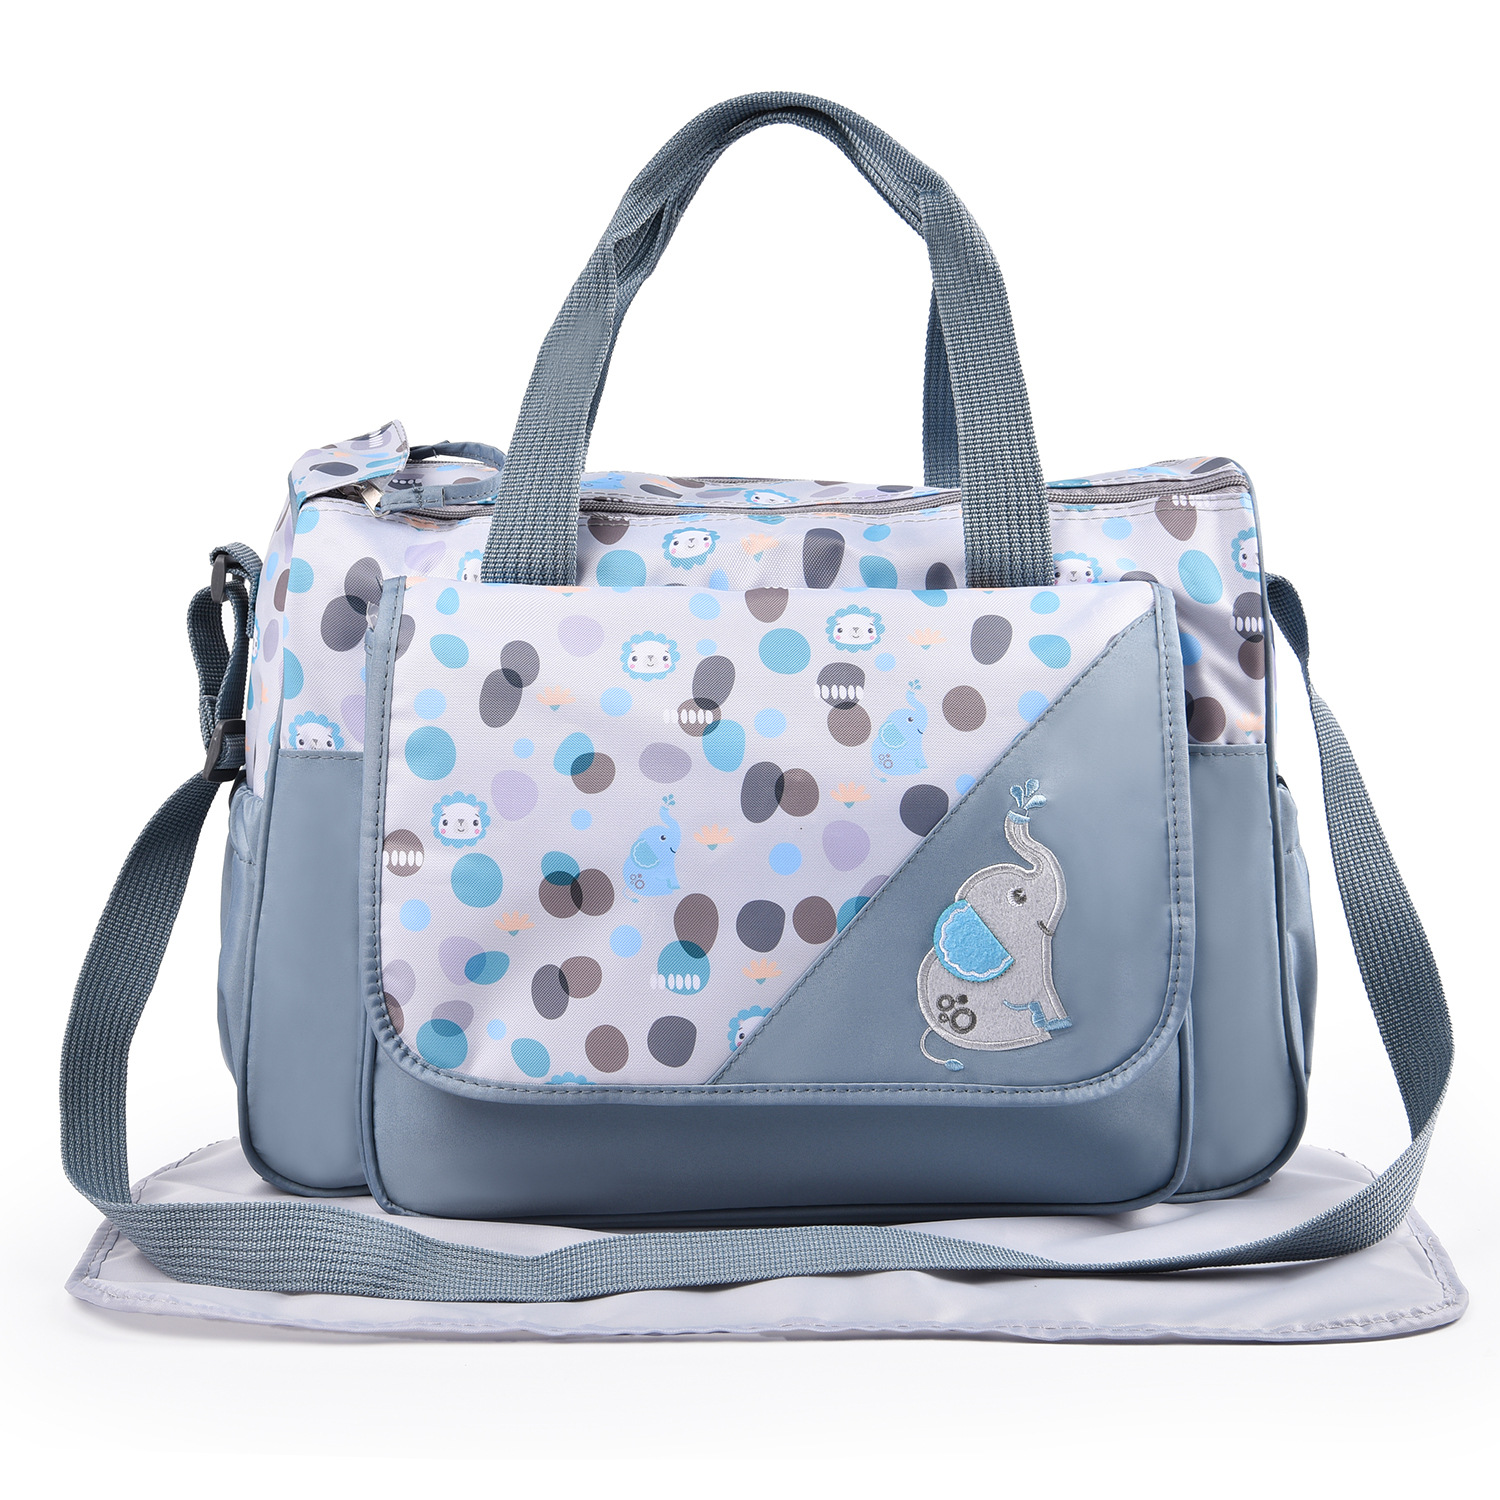 Multifunctional Travel Diaper Side Bag Set With Changing Mat With Pockets